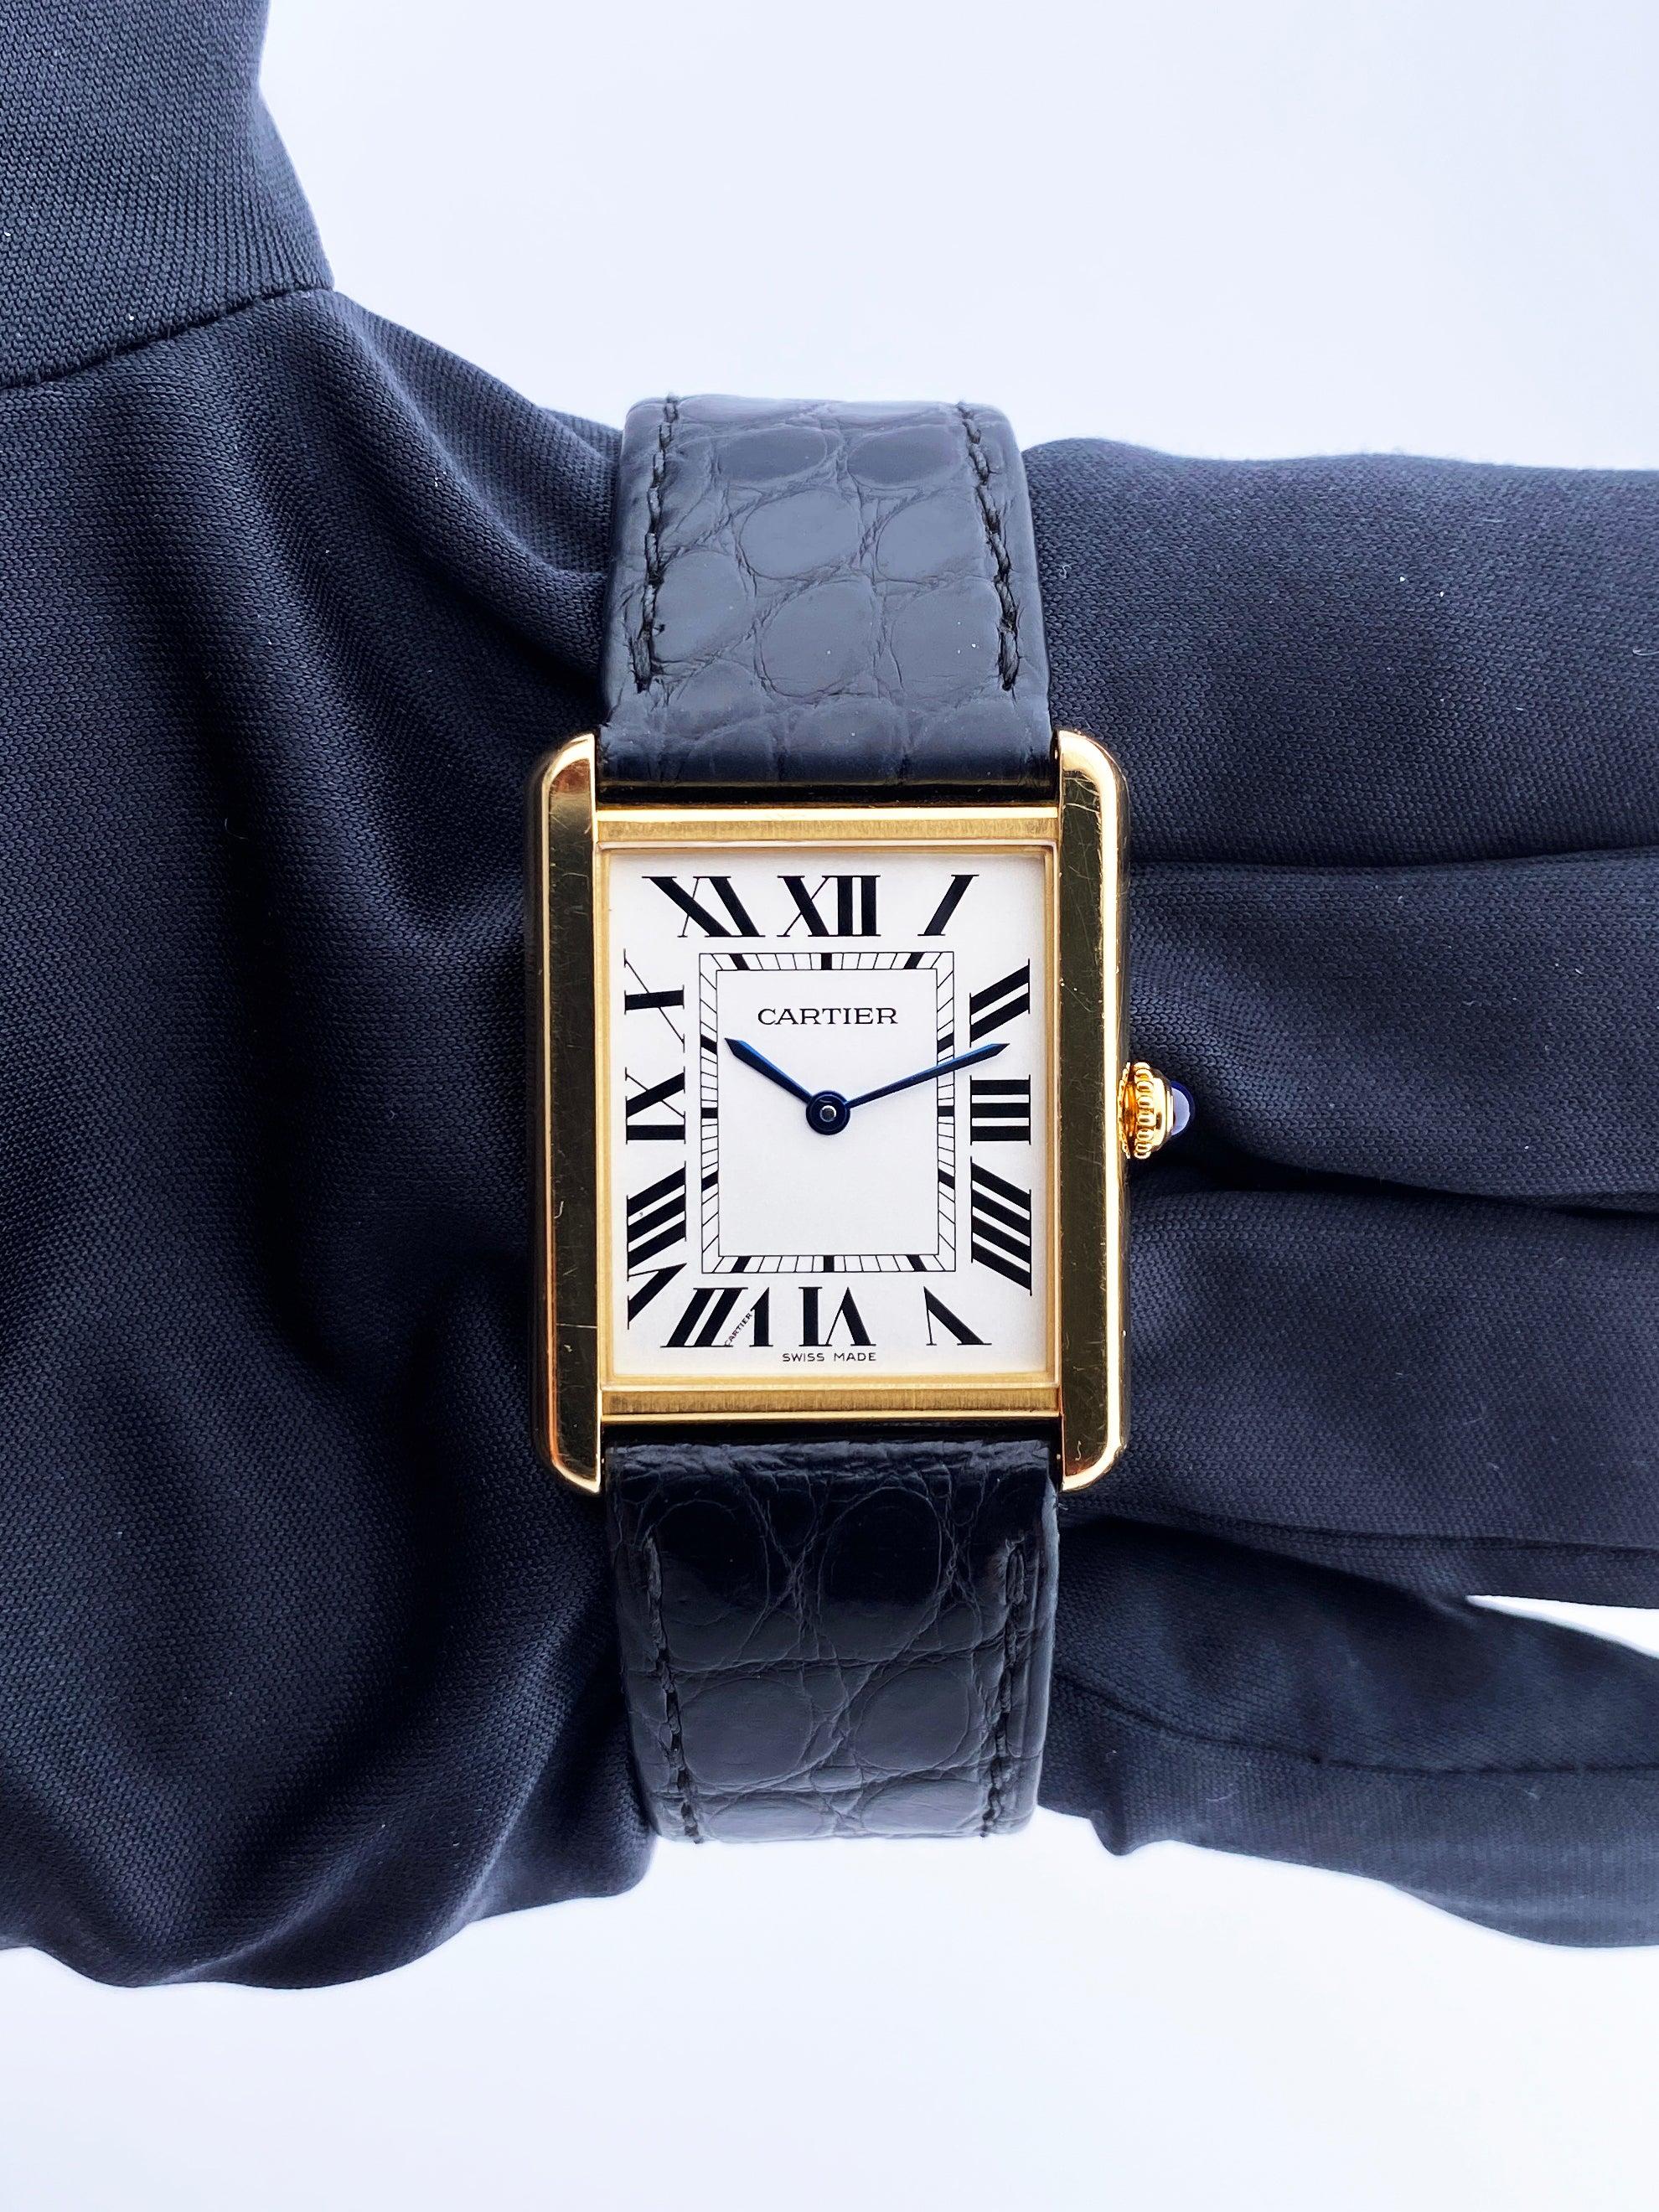 Cartier Tank Solo W5200004/2742 Ladies Watch. 28mm 18K yellow gold case. 18K yellow gold stationary bezel. Sliver dial with blue steel hands and Roman numeral hour markers. Minute markers on the inner dial. Black leather strap with yellow gold